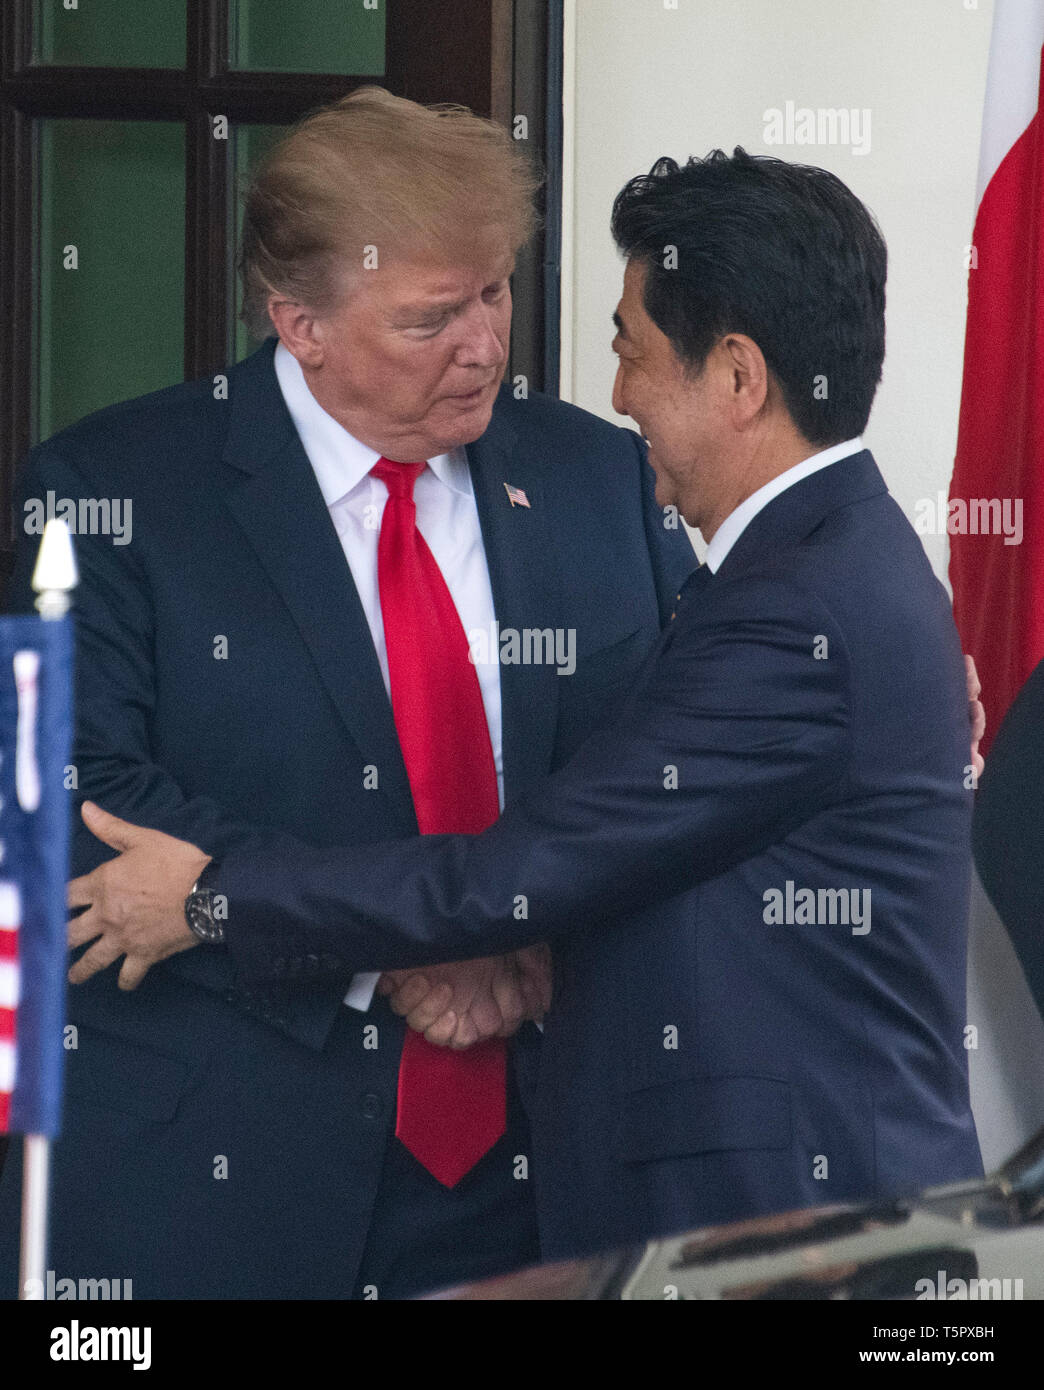 Washington, United States Of America. 26th Apr, 2019. United States President Donald J. Trump welcomes Prime Minister Shinzo Abe of Japan to the White House in Washington, DC on April 26, 2019. Credit: Ron Sachs/CNP | usage worldwide Credit: dpa/Alamy Live News Stock Photo